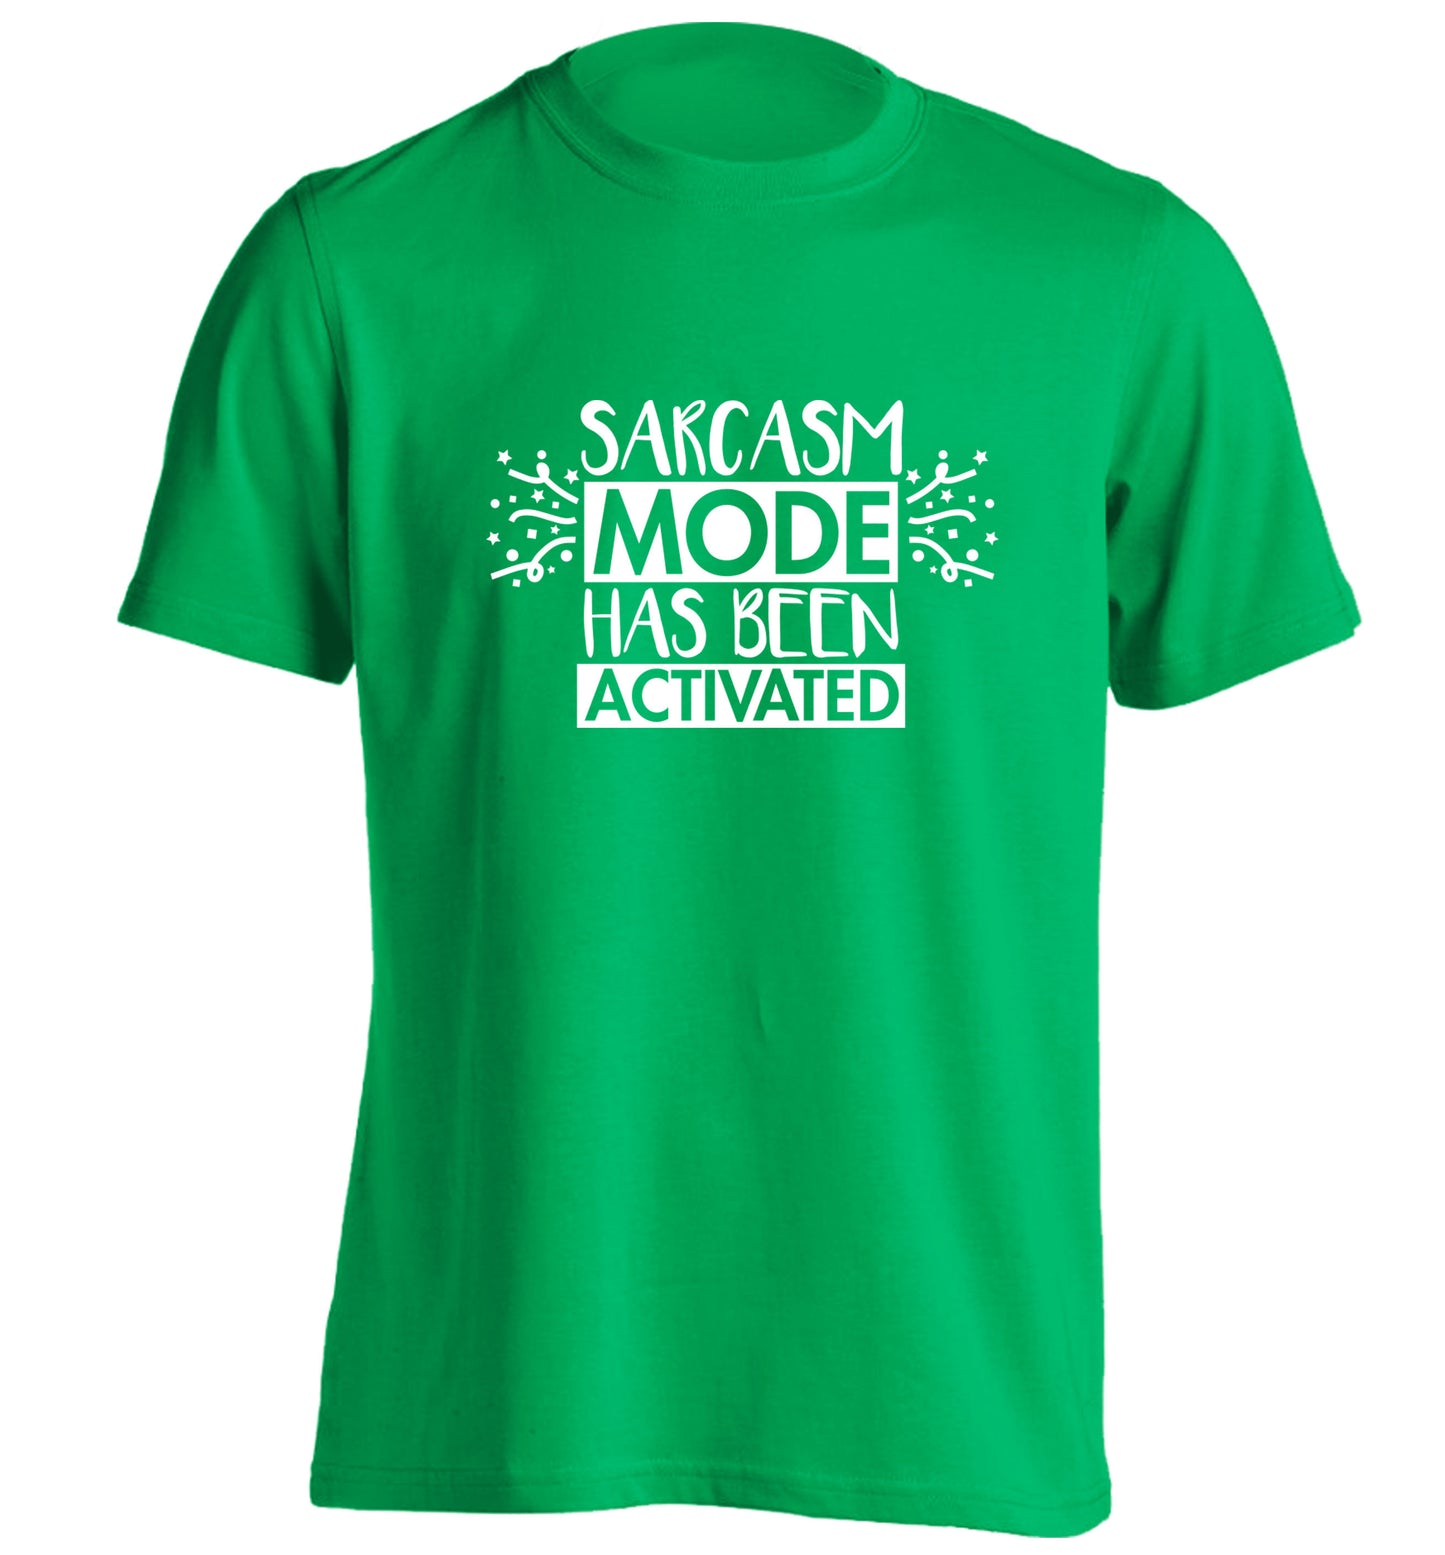 Sarcarsm mode has been activated adults unisex green Tshirt 2XL